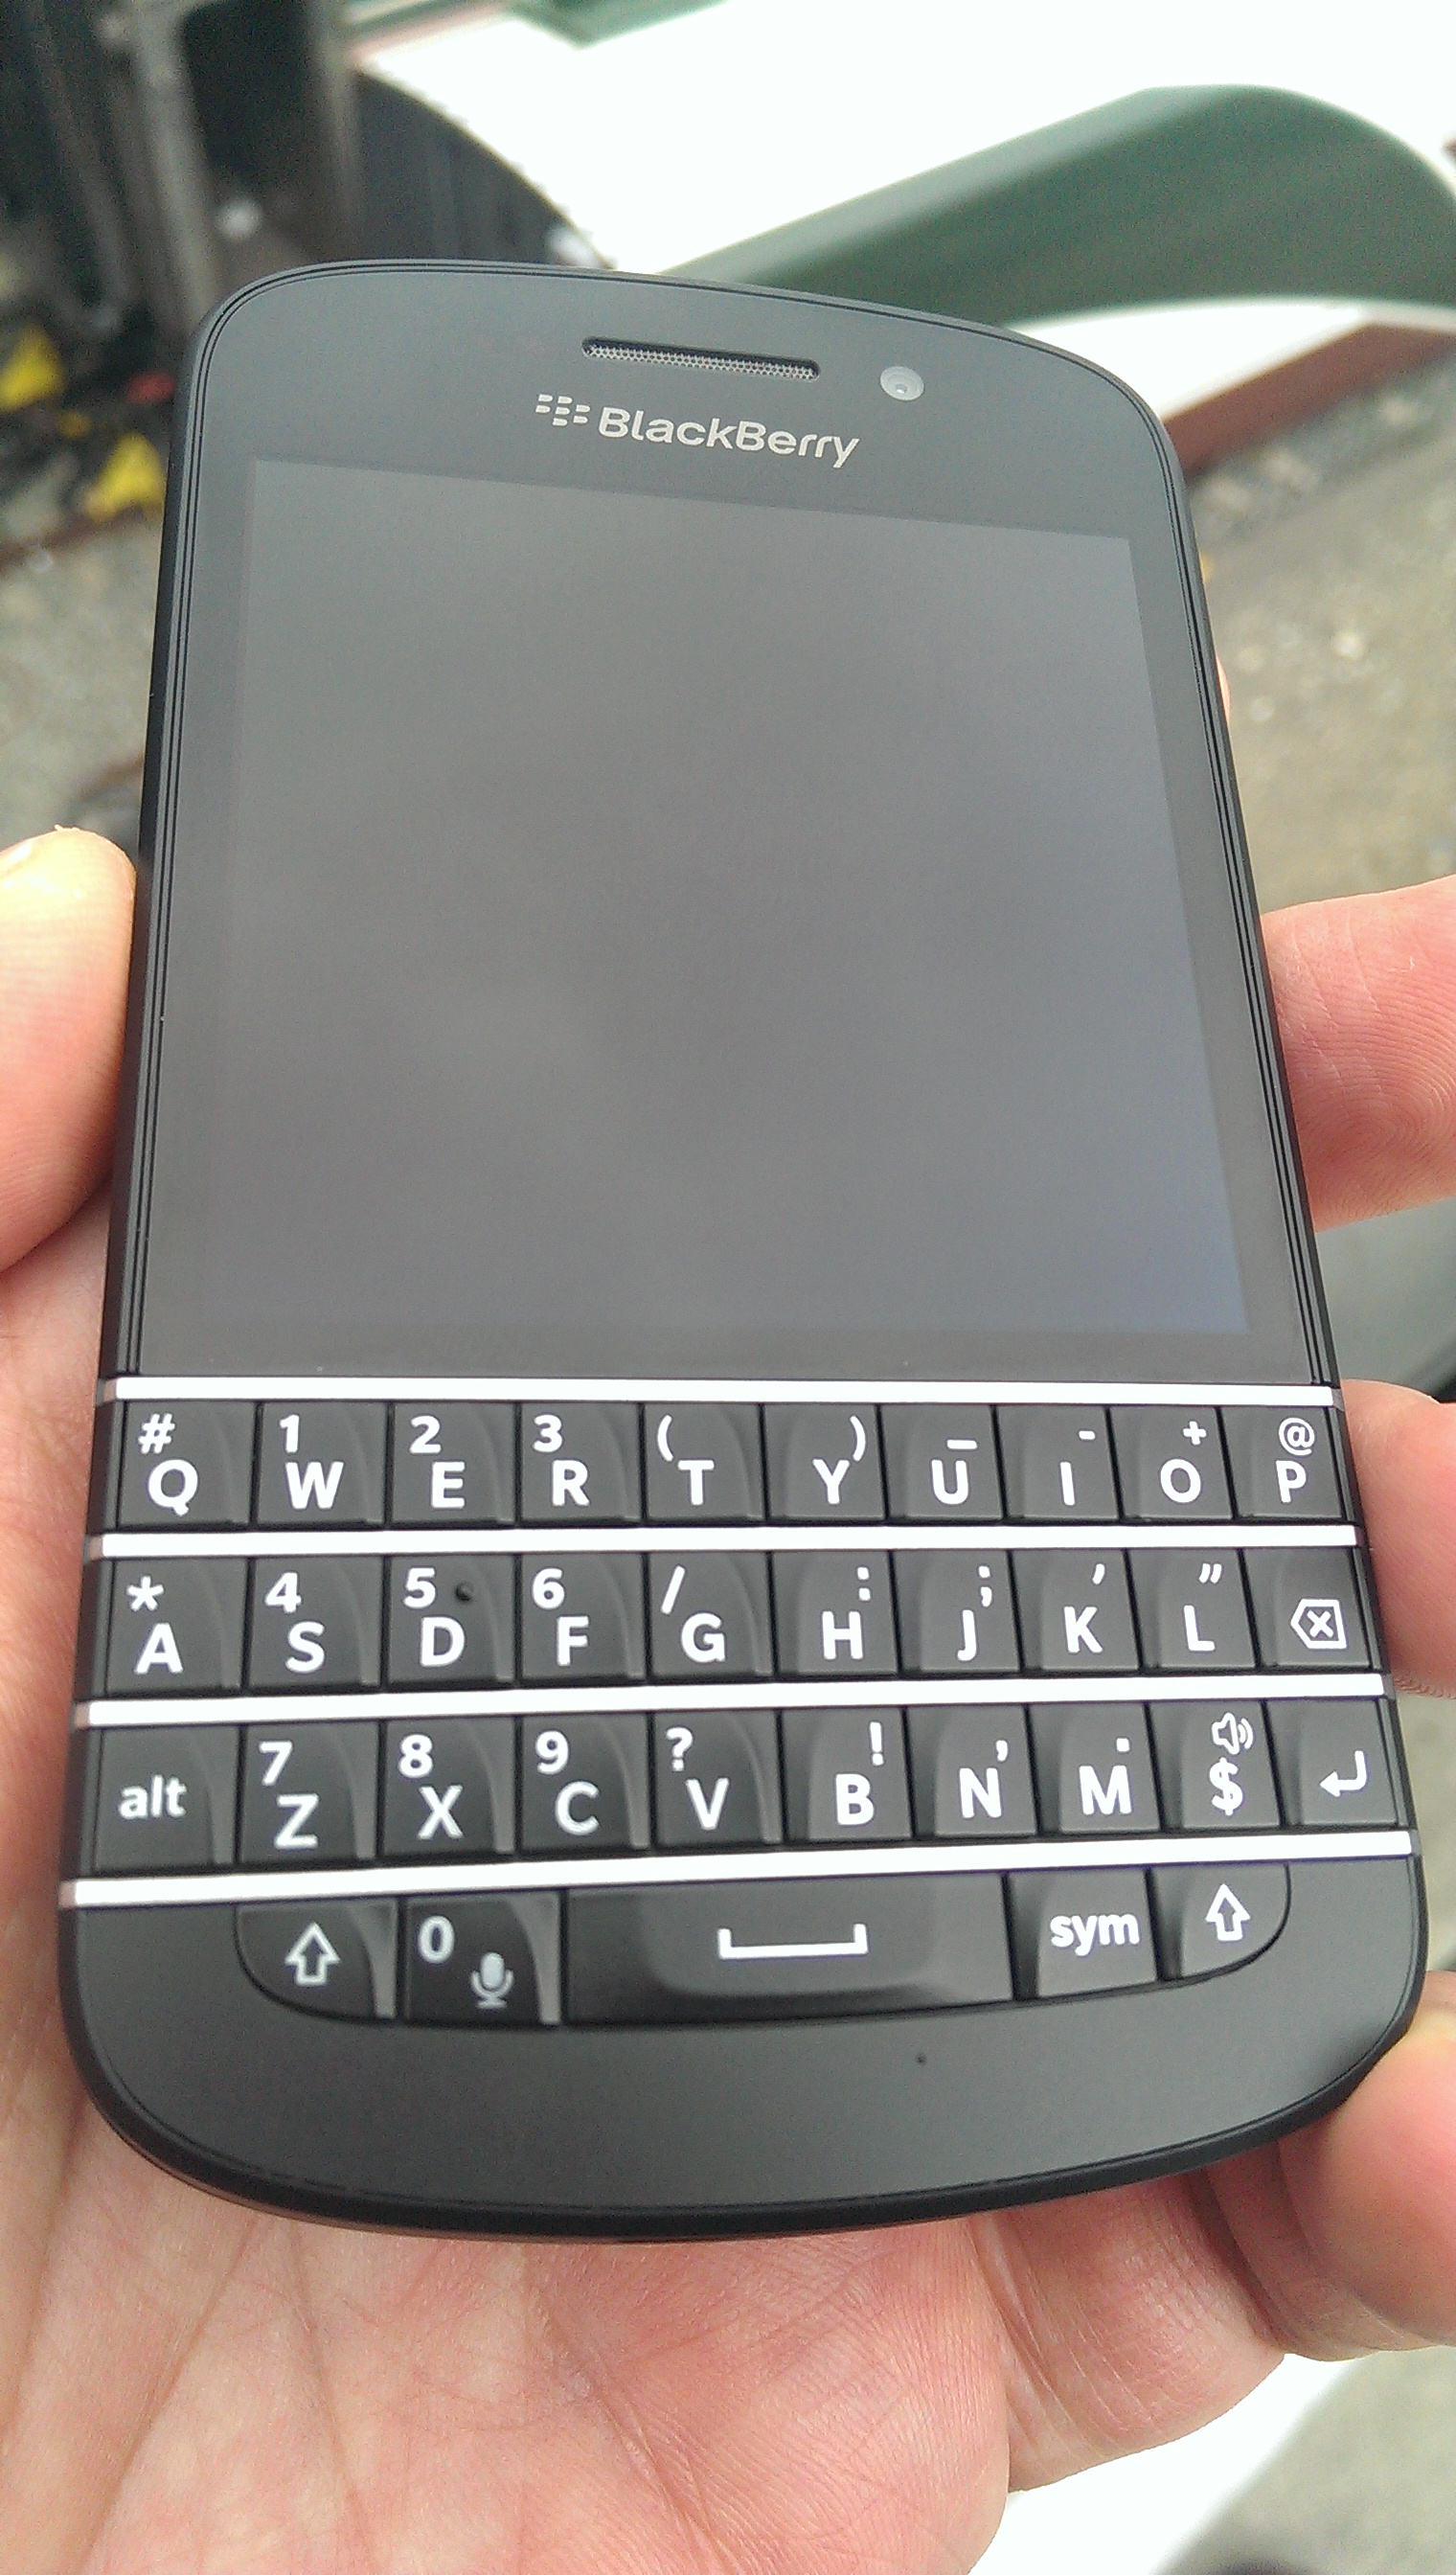 BlackBerry Q10: Hardware QWERTY and long battery life have a place in mobile